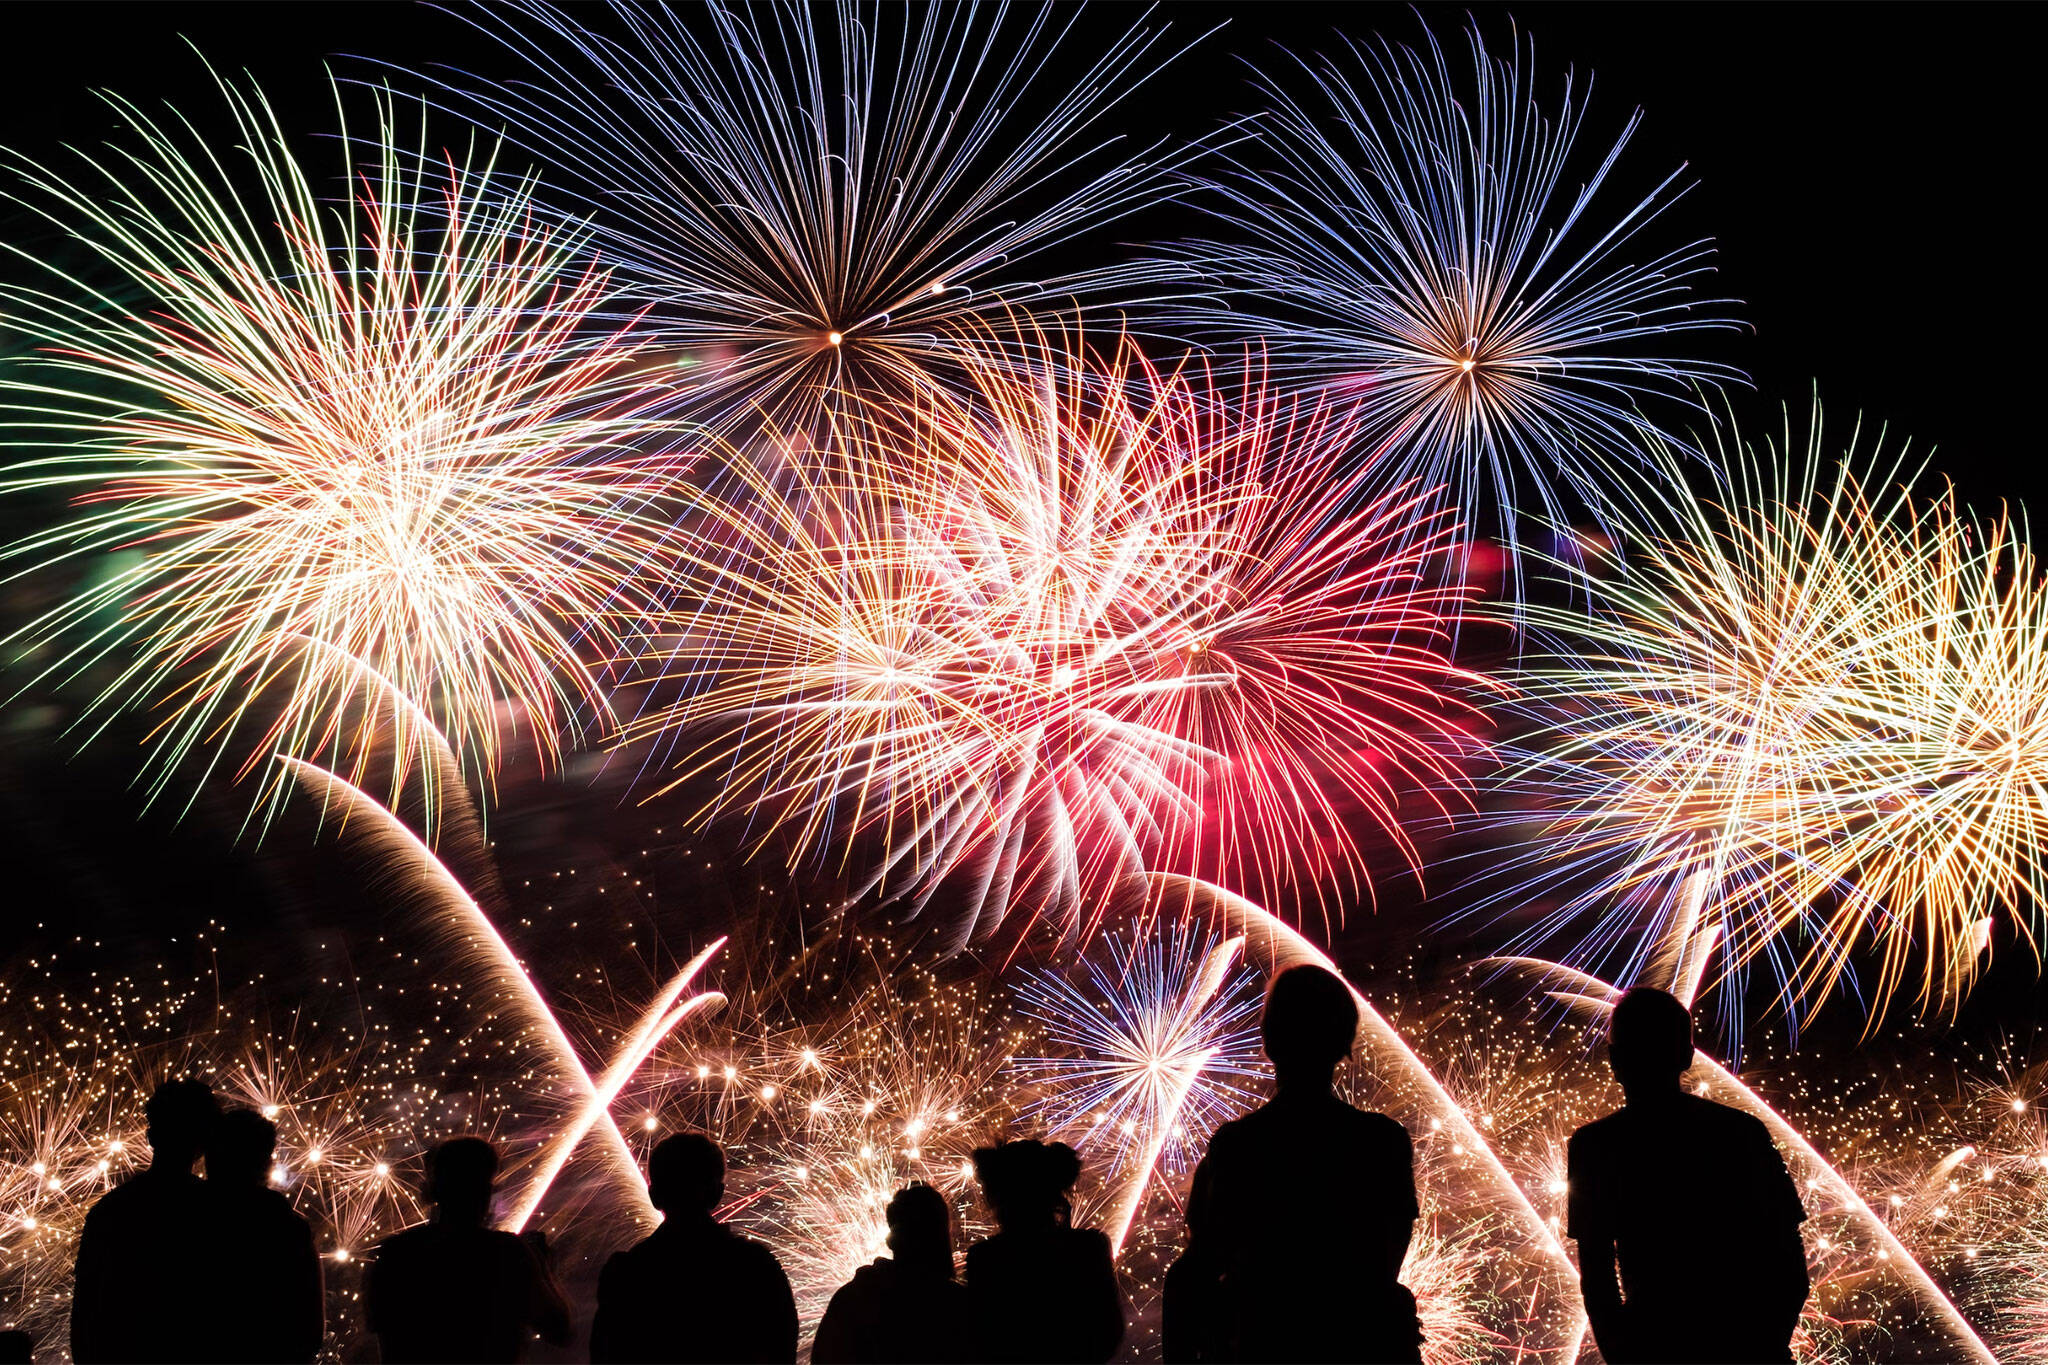 Here are the rules for setting off your own fireworks in Toronto on